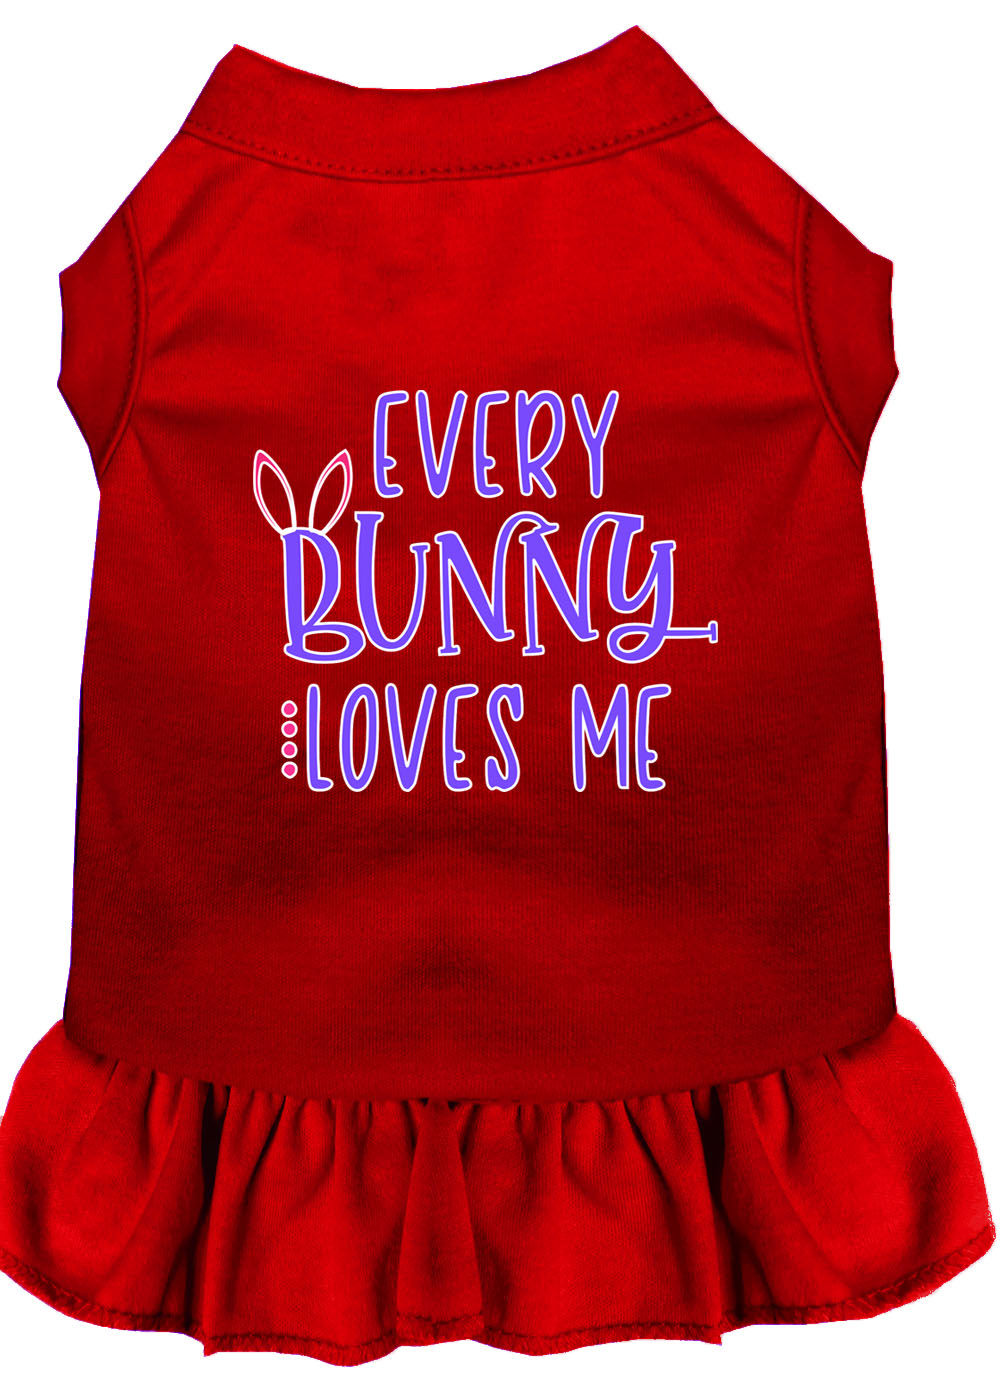 Every Bunny Loves me Screen Print Dog Dress Red XL